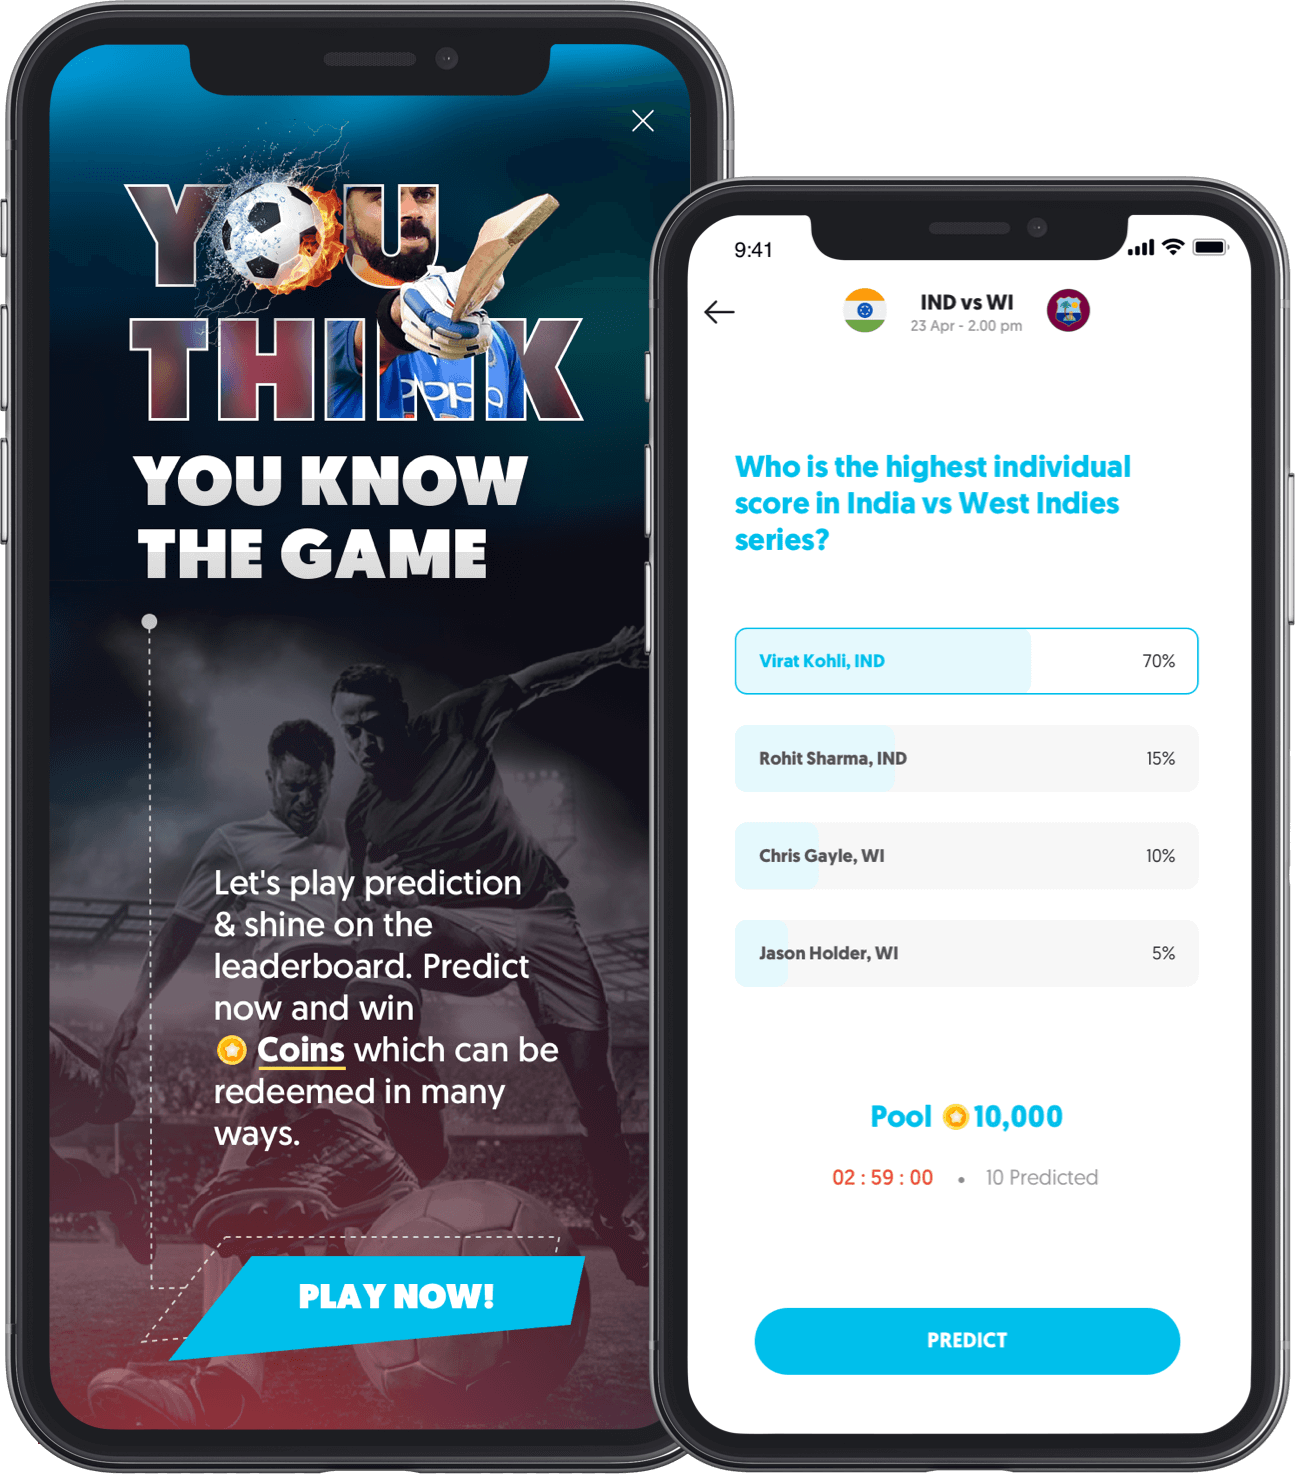 A customer engagement platform for the sports fans- prediction game with betting pools that work on virtual currency coins developed by Vinfotech